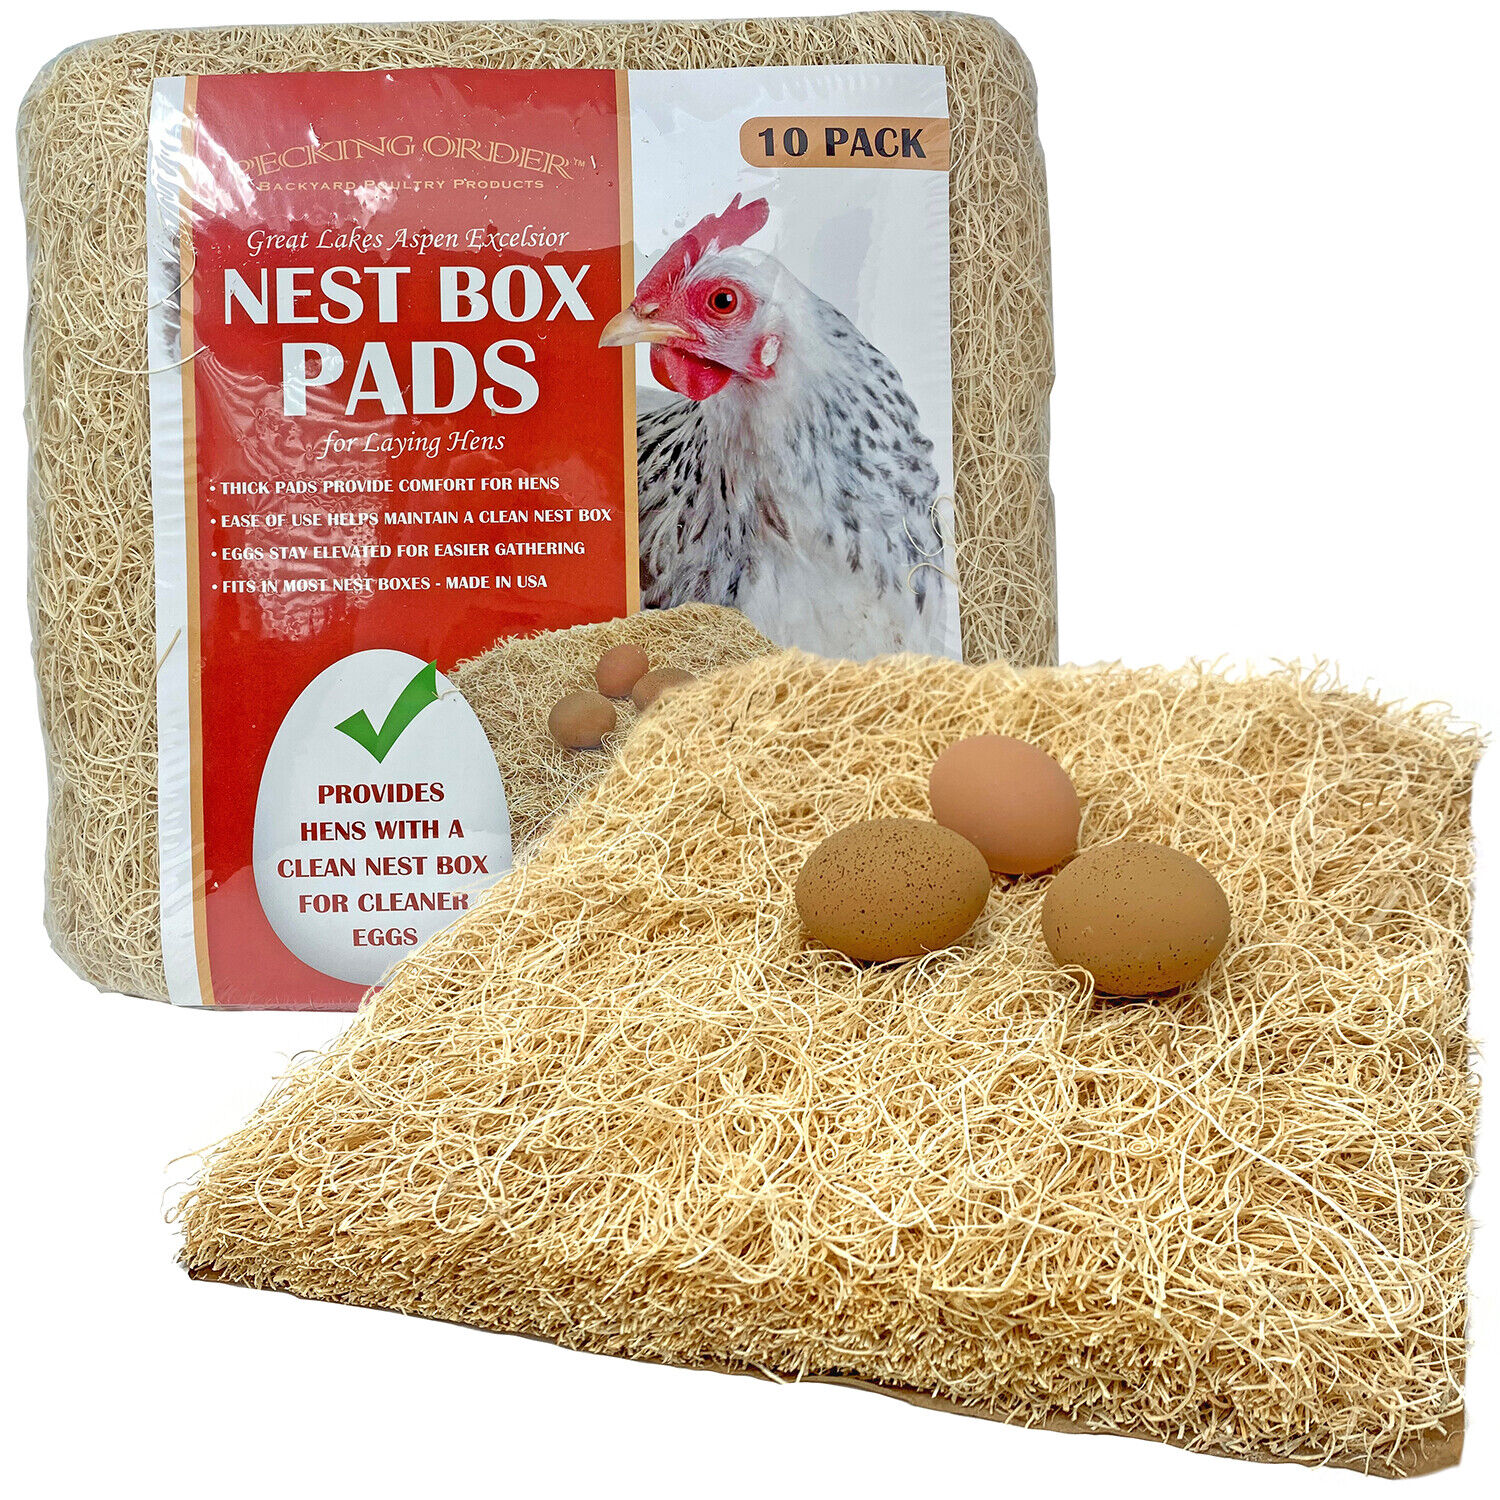 Pecking Order Chicken Nest Box Pads 10 Pack, Made with Great Lakes Aspen